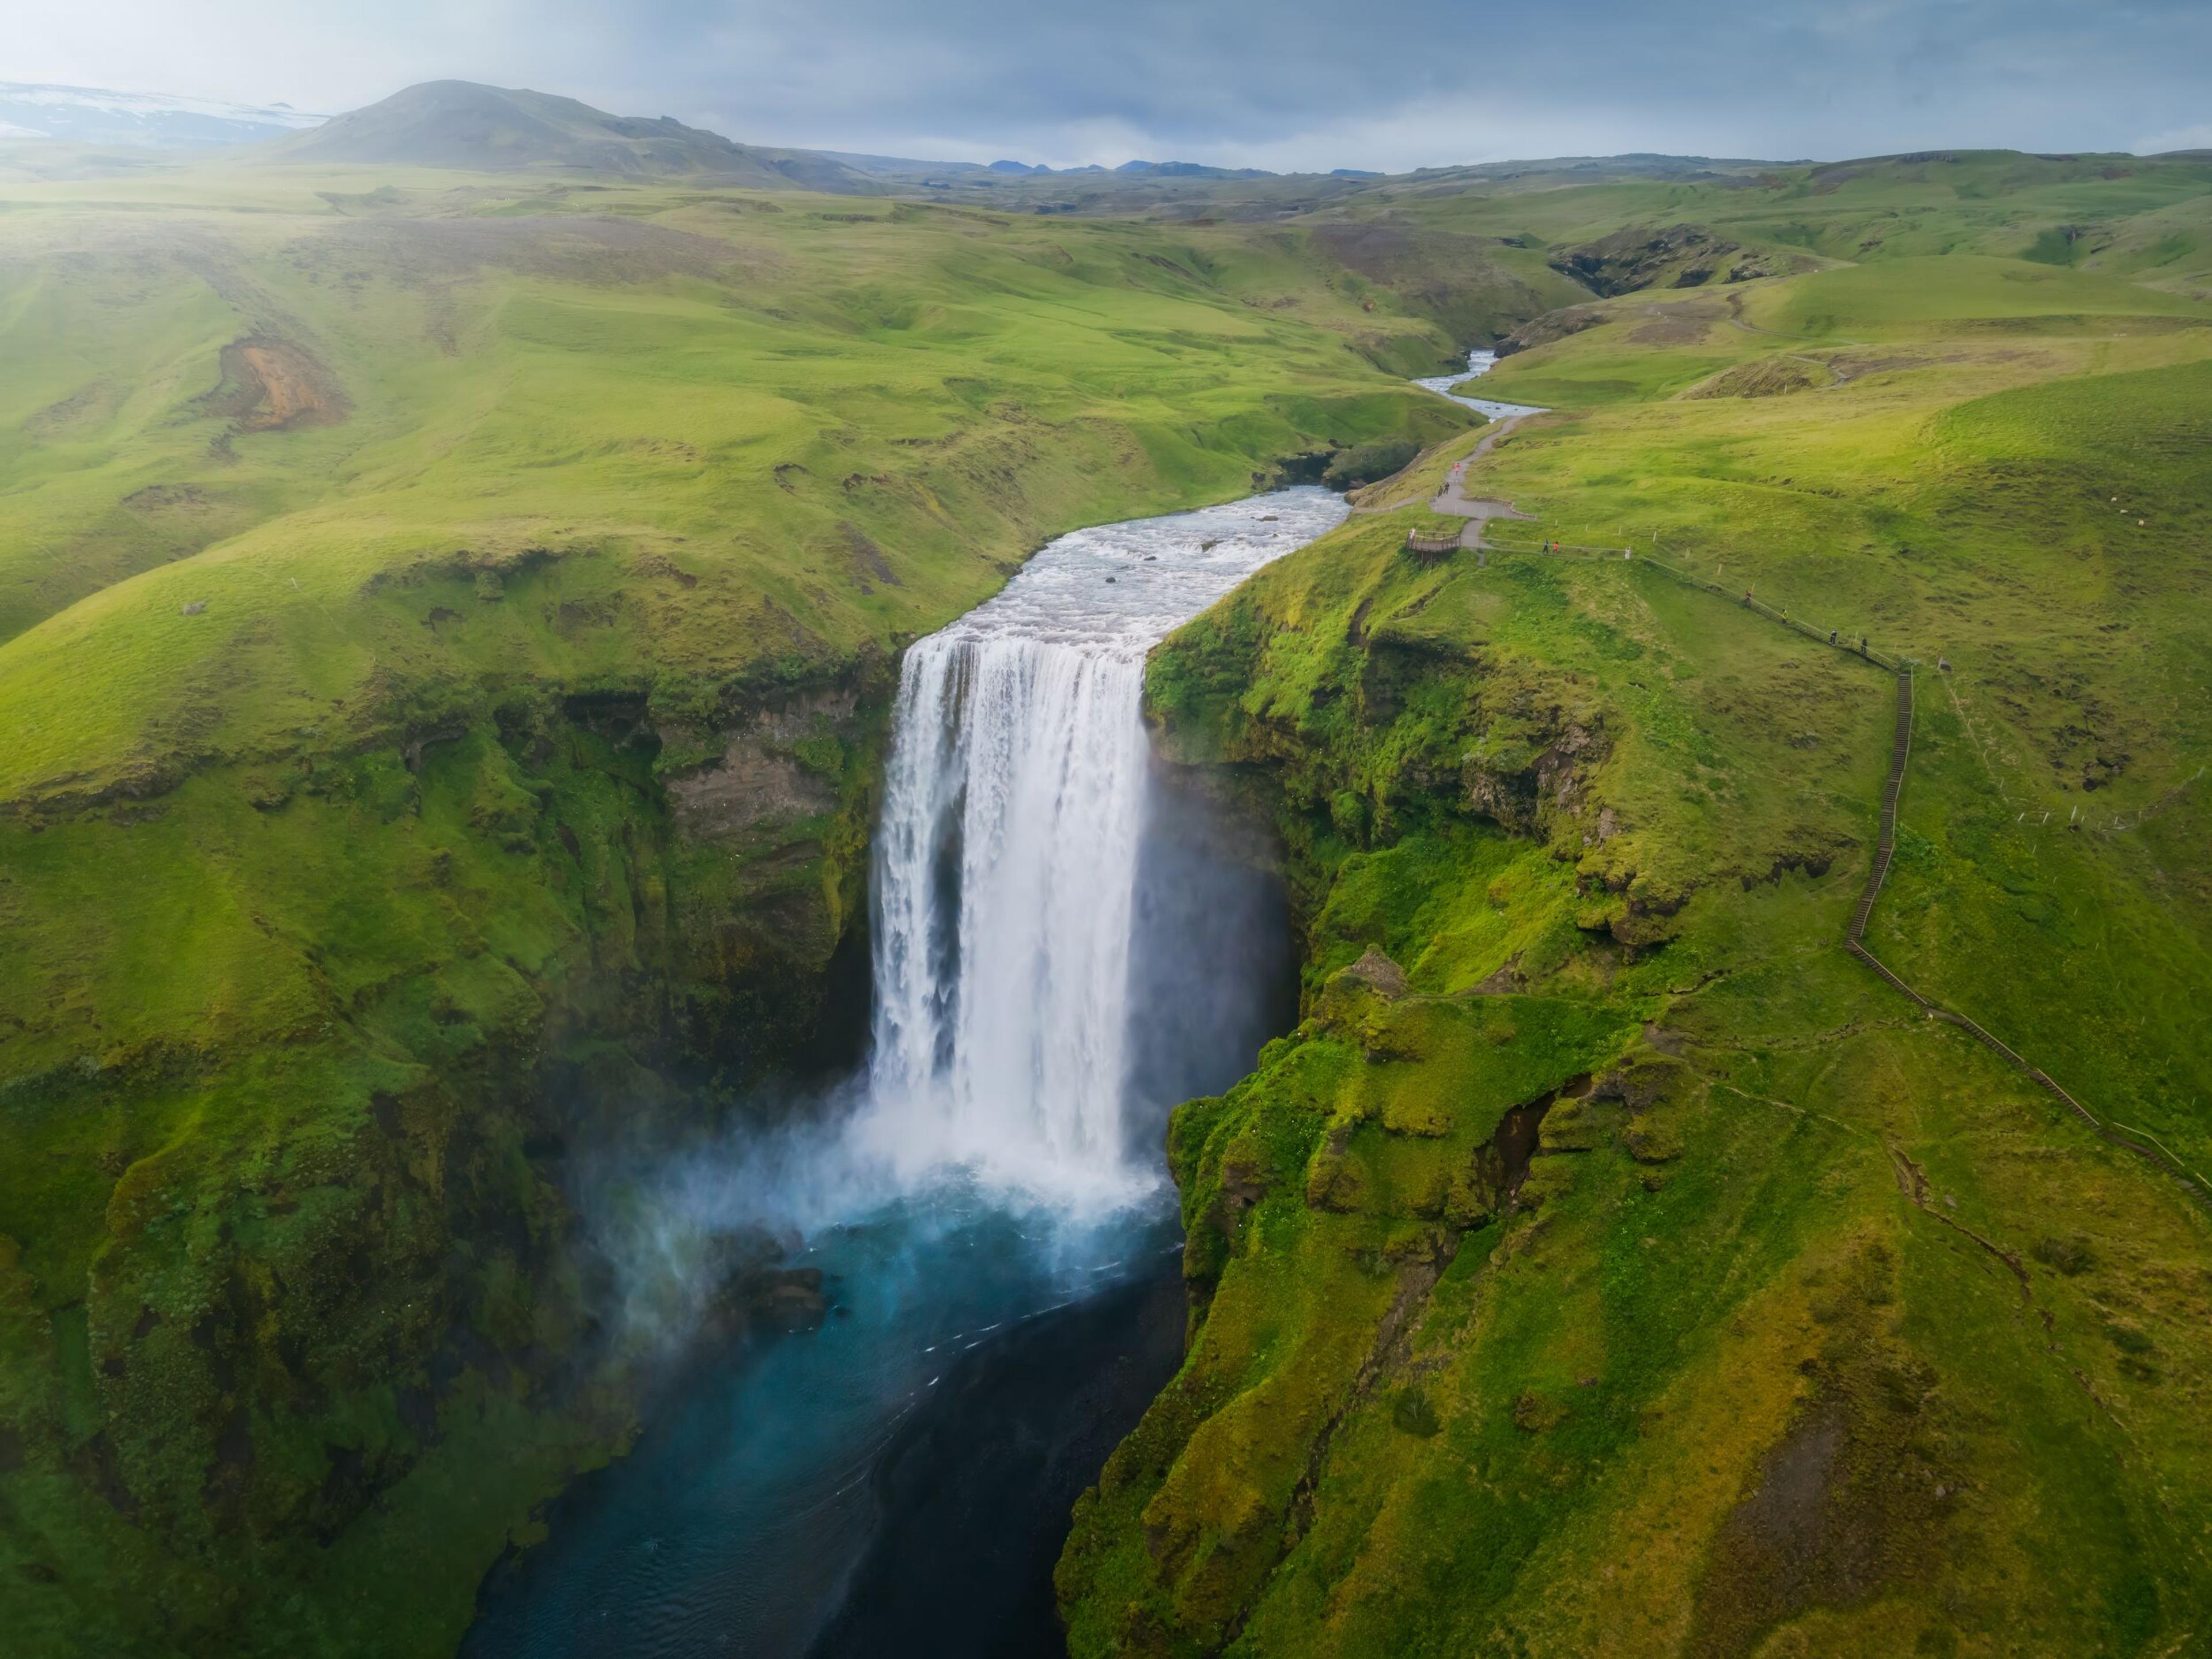 "Aerial view of the majestic Skógafoss waterfall cascading amidst a vivid green landscape